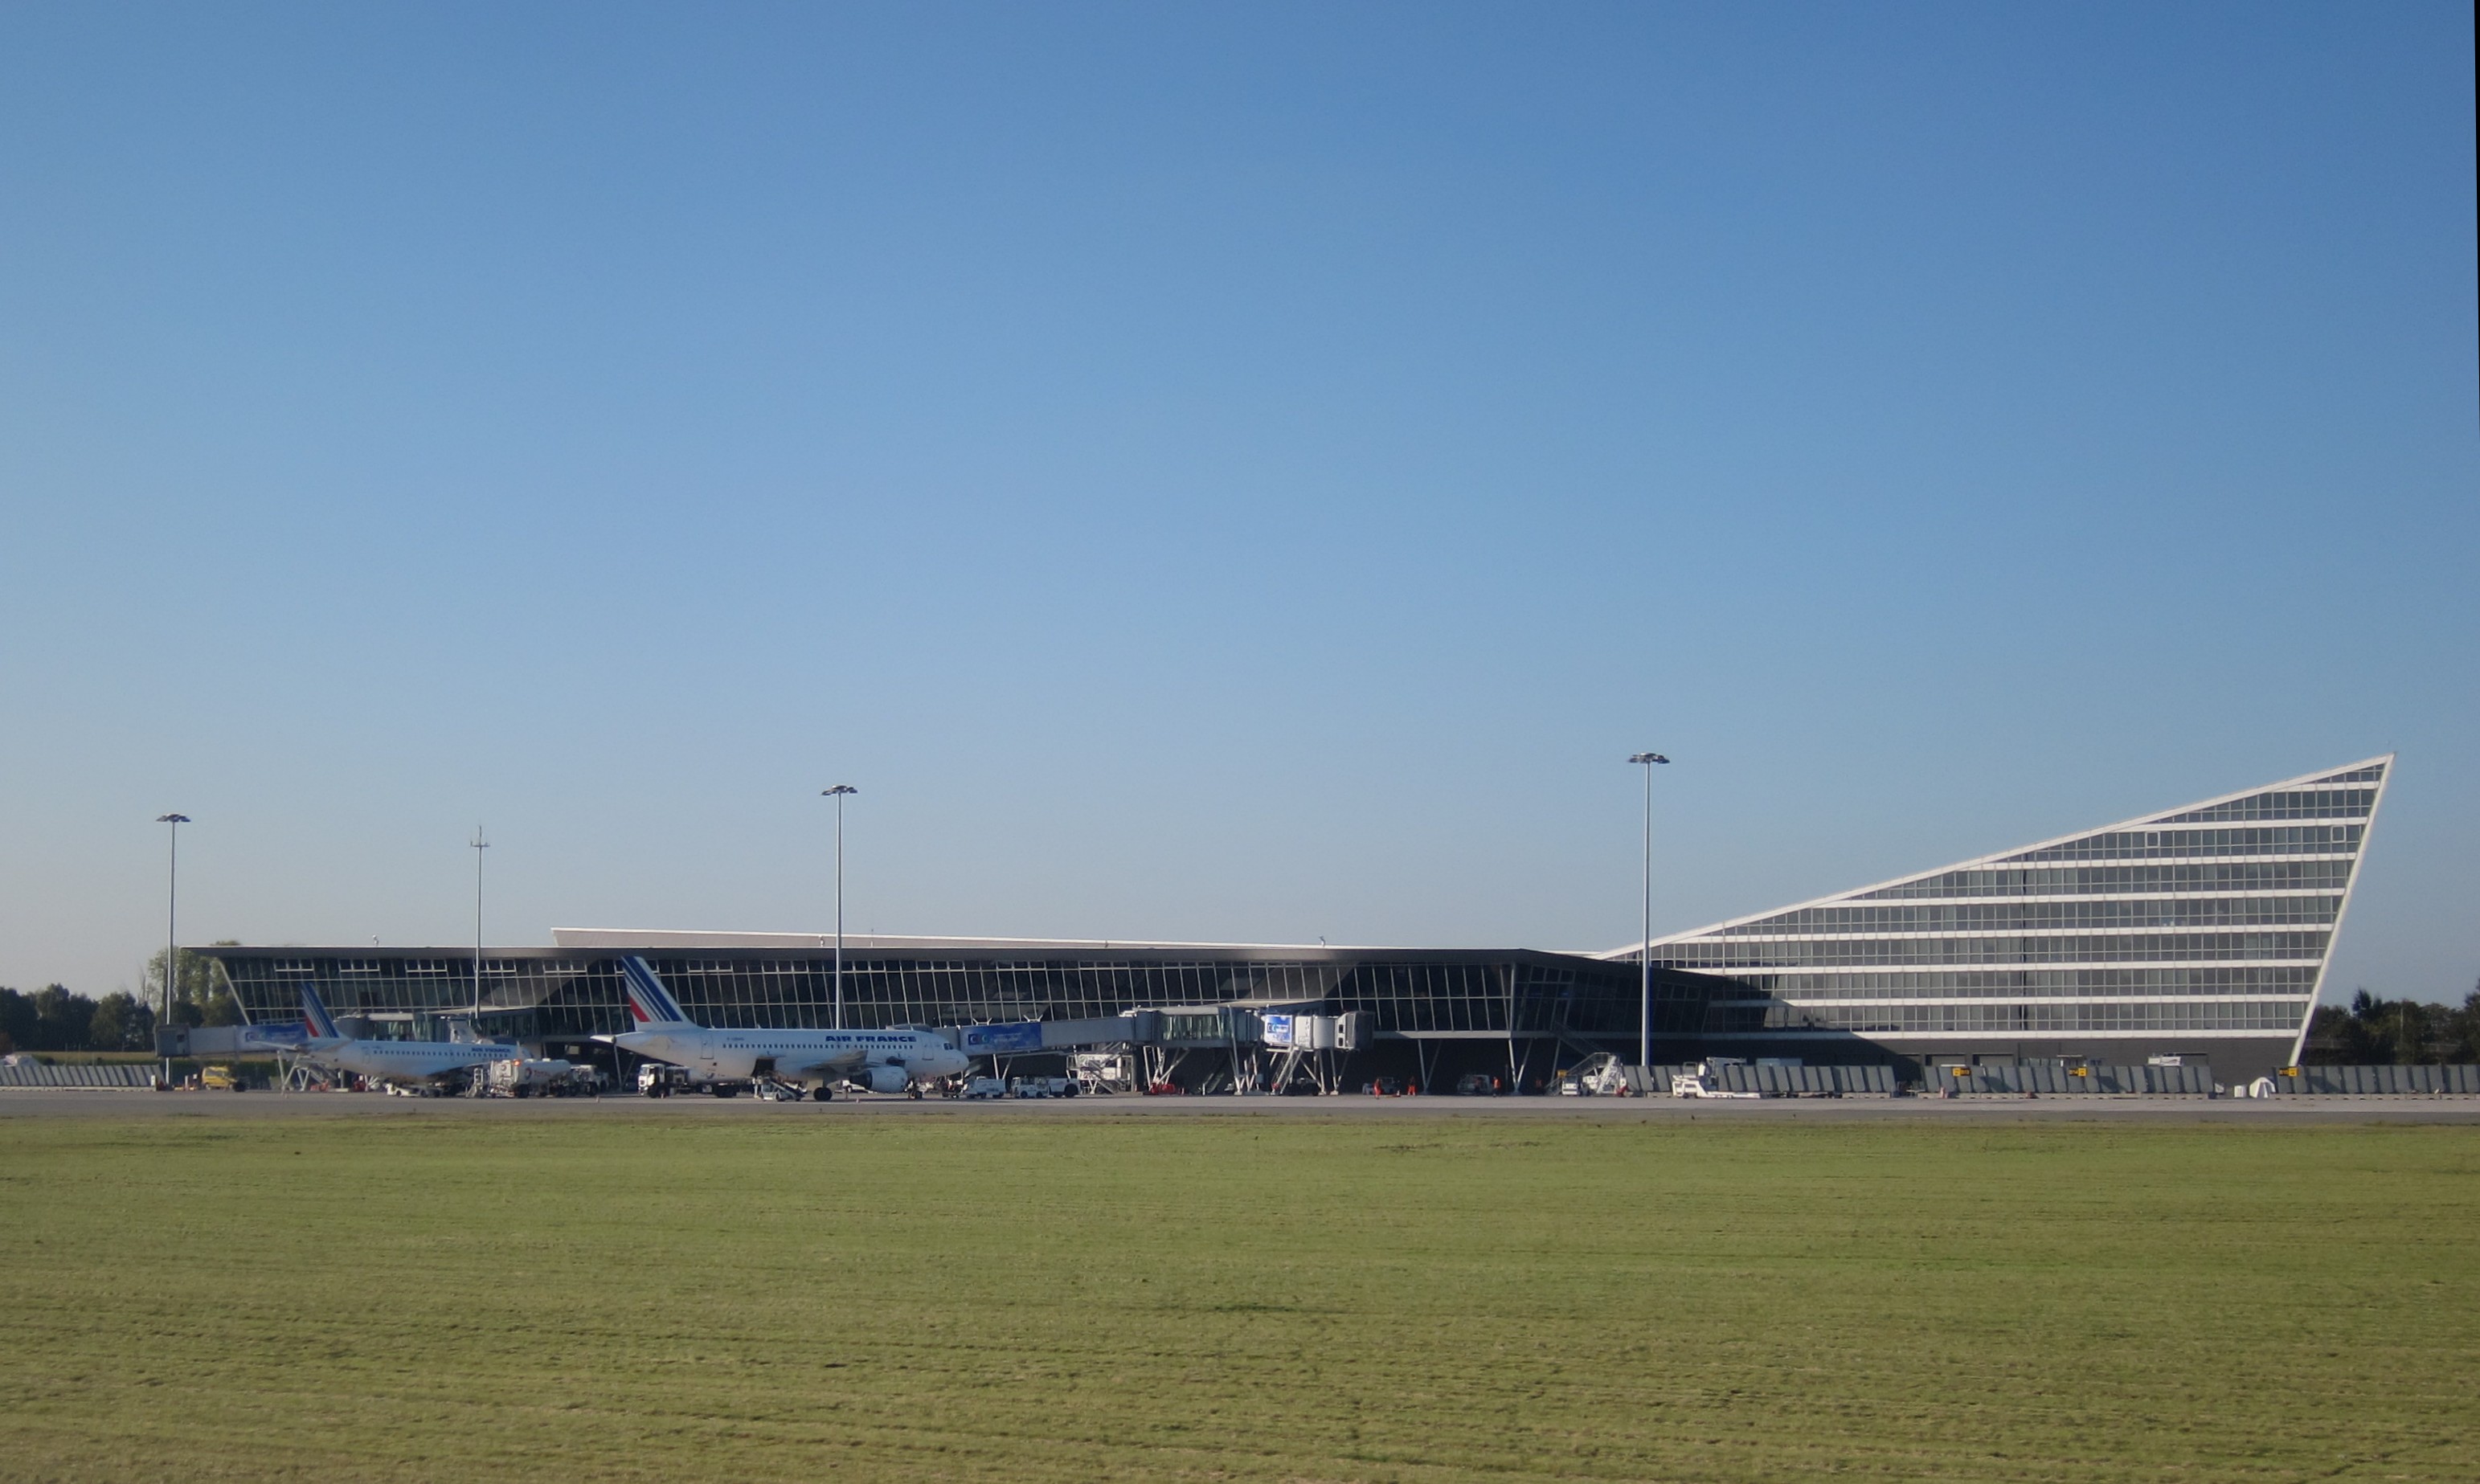 Lille Airport